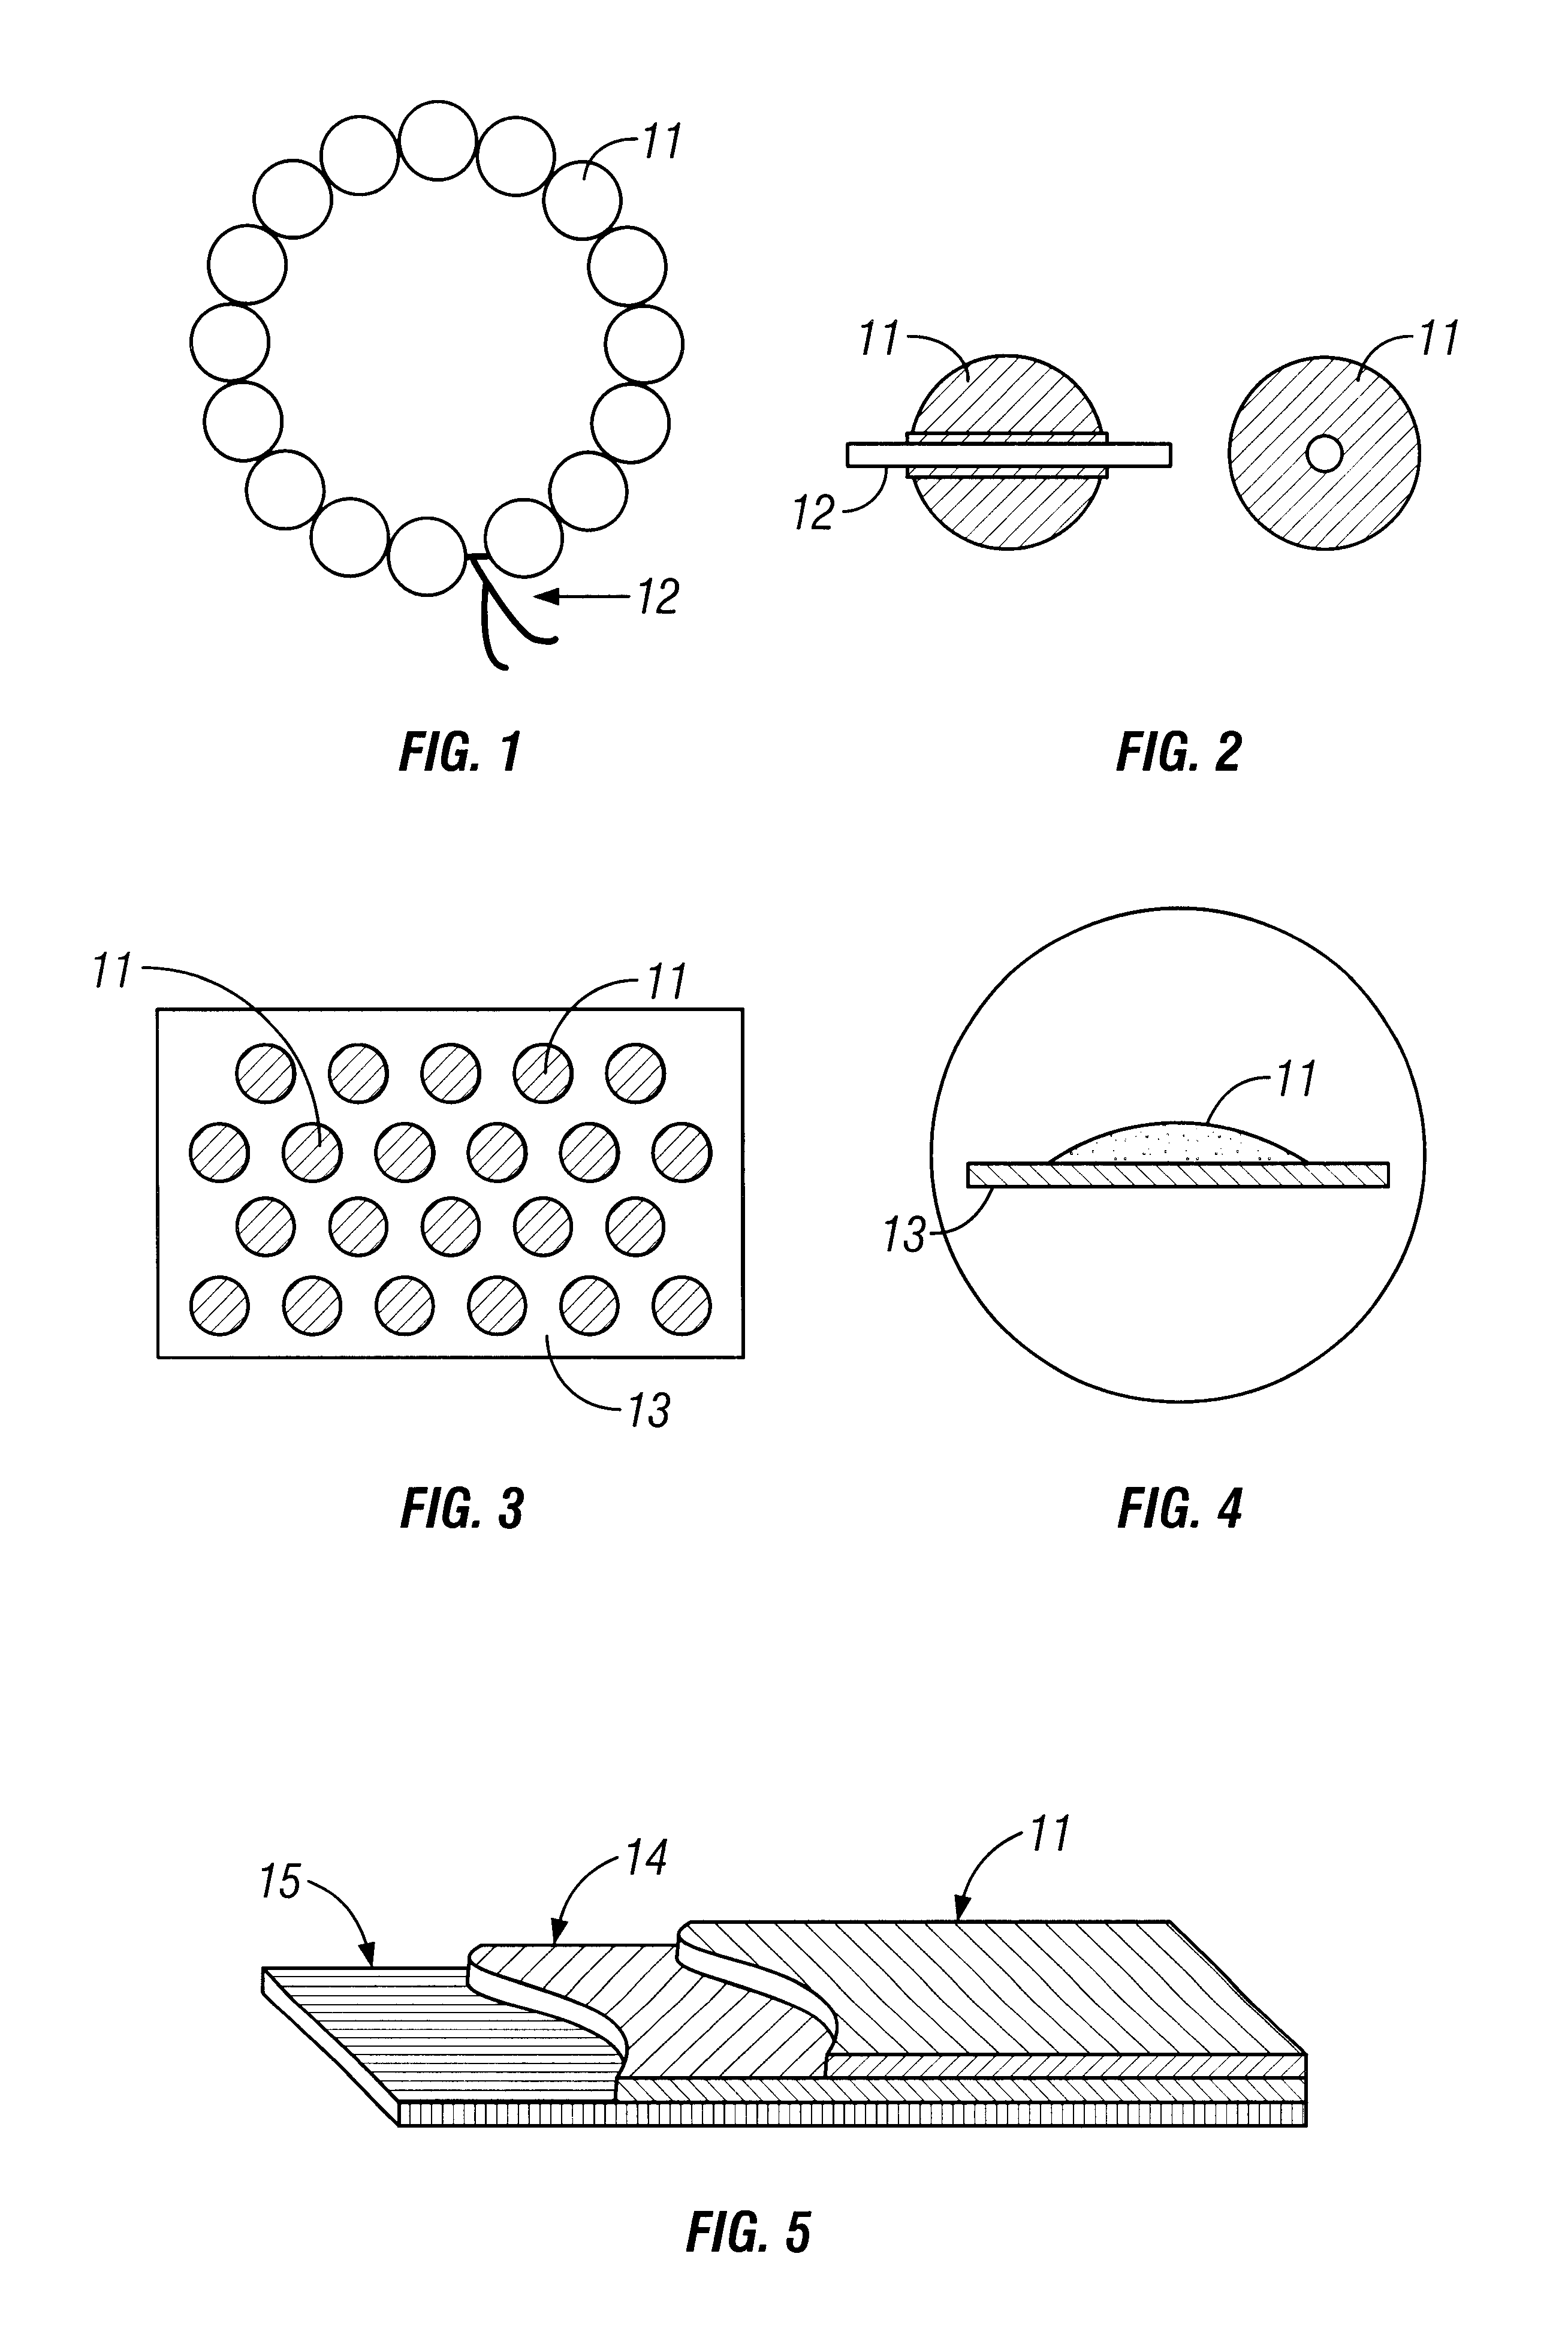 Personal therapeutic device using far infrared radiation